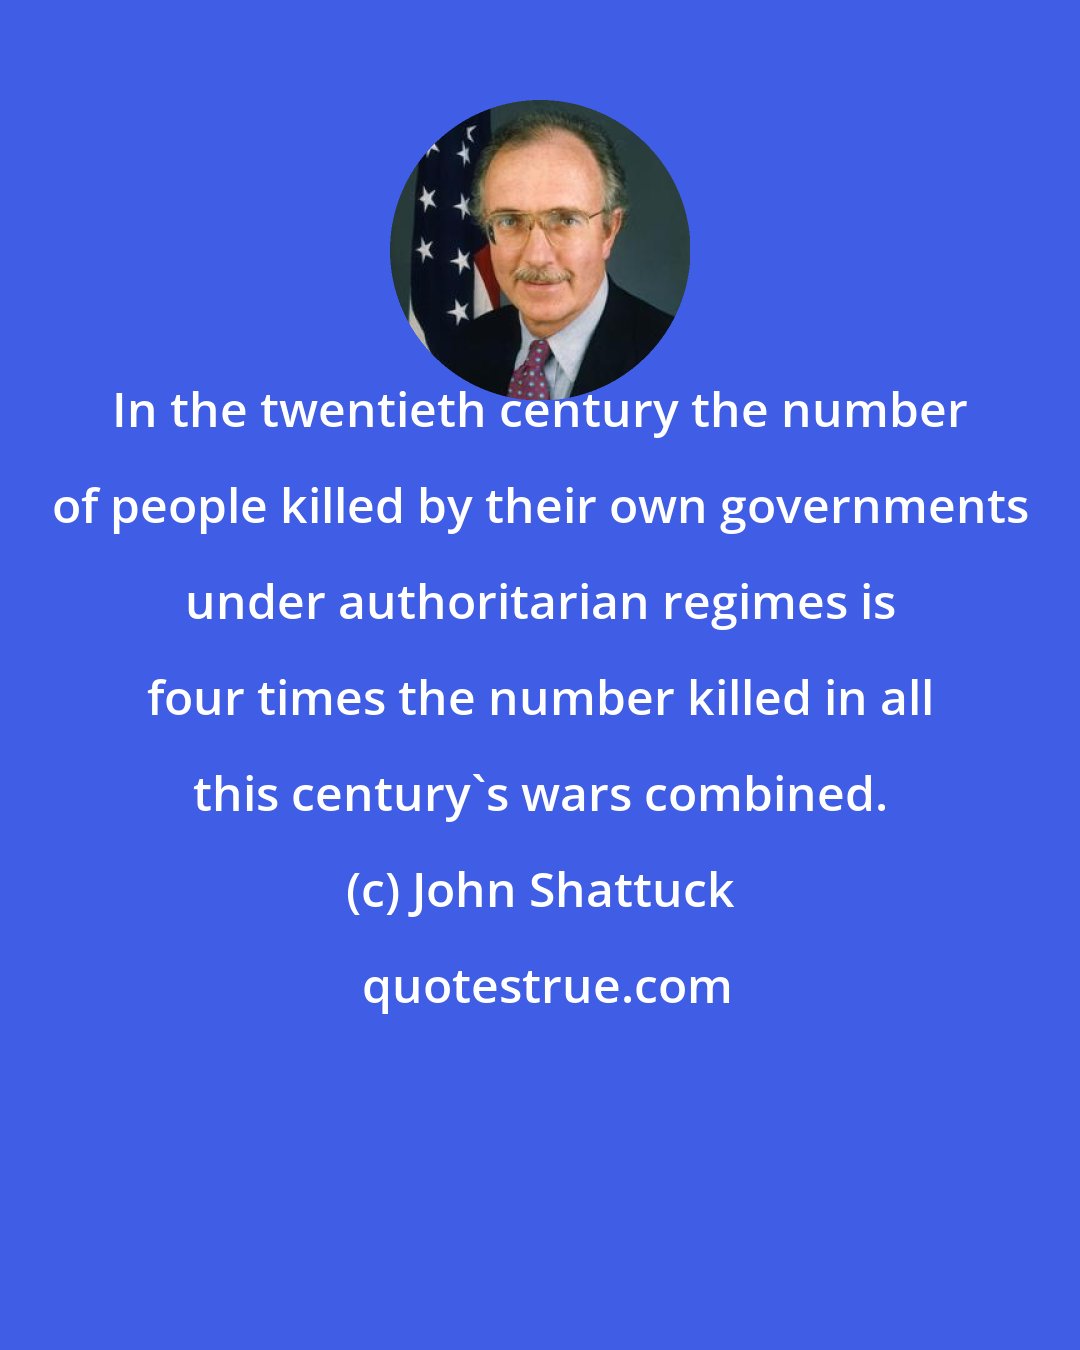 John Shattuck: In the twentieth century the number of people killed by their own governments under authoritarian regimes is four times the number killed in all this century's wars combined.